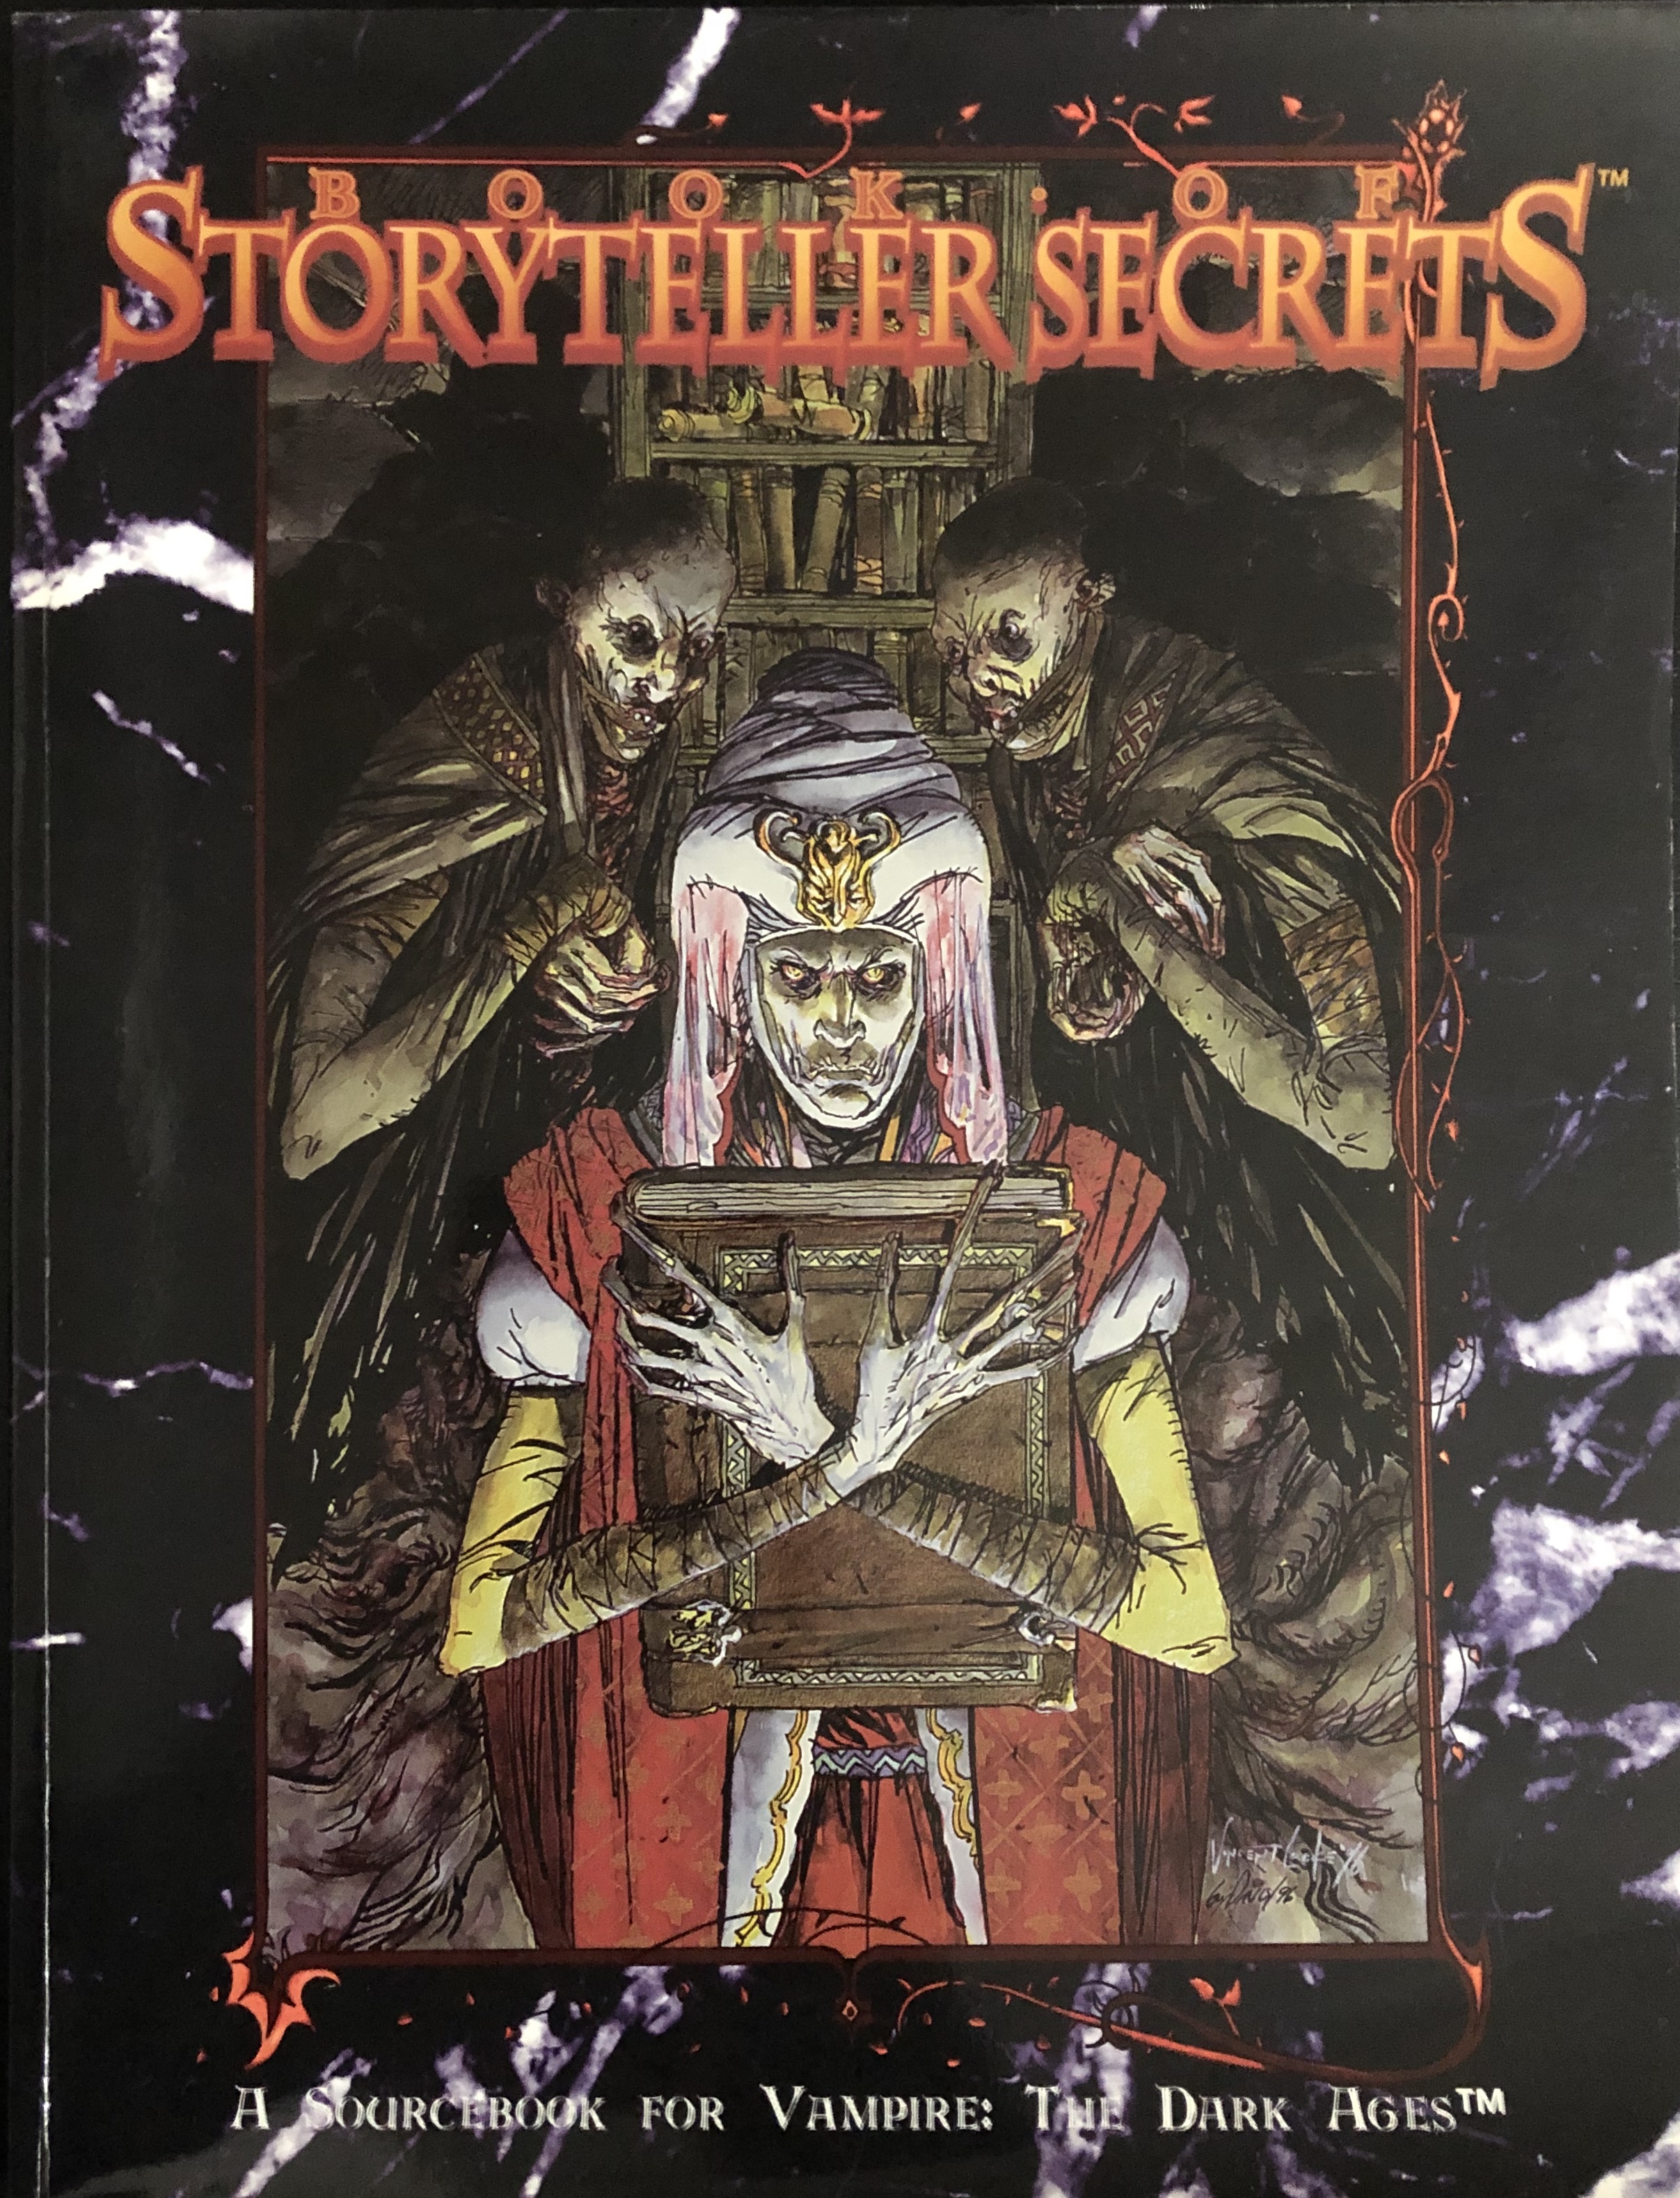 Vampire Ser.: The Dark Ages: Vampire : The Dark Ages by Kevin Hassall 1996, Hardcover Jennifer Hartshorn for sale online Ethan Skemp and Mark Rein-Hagen 